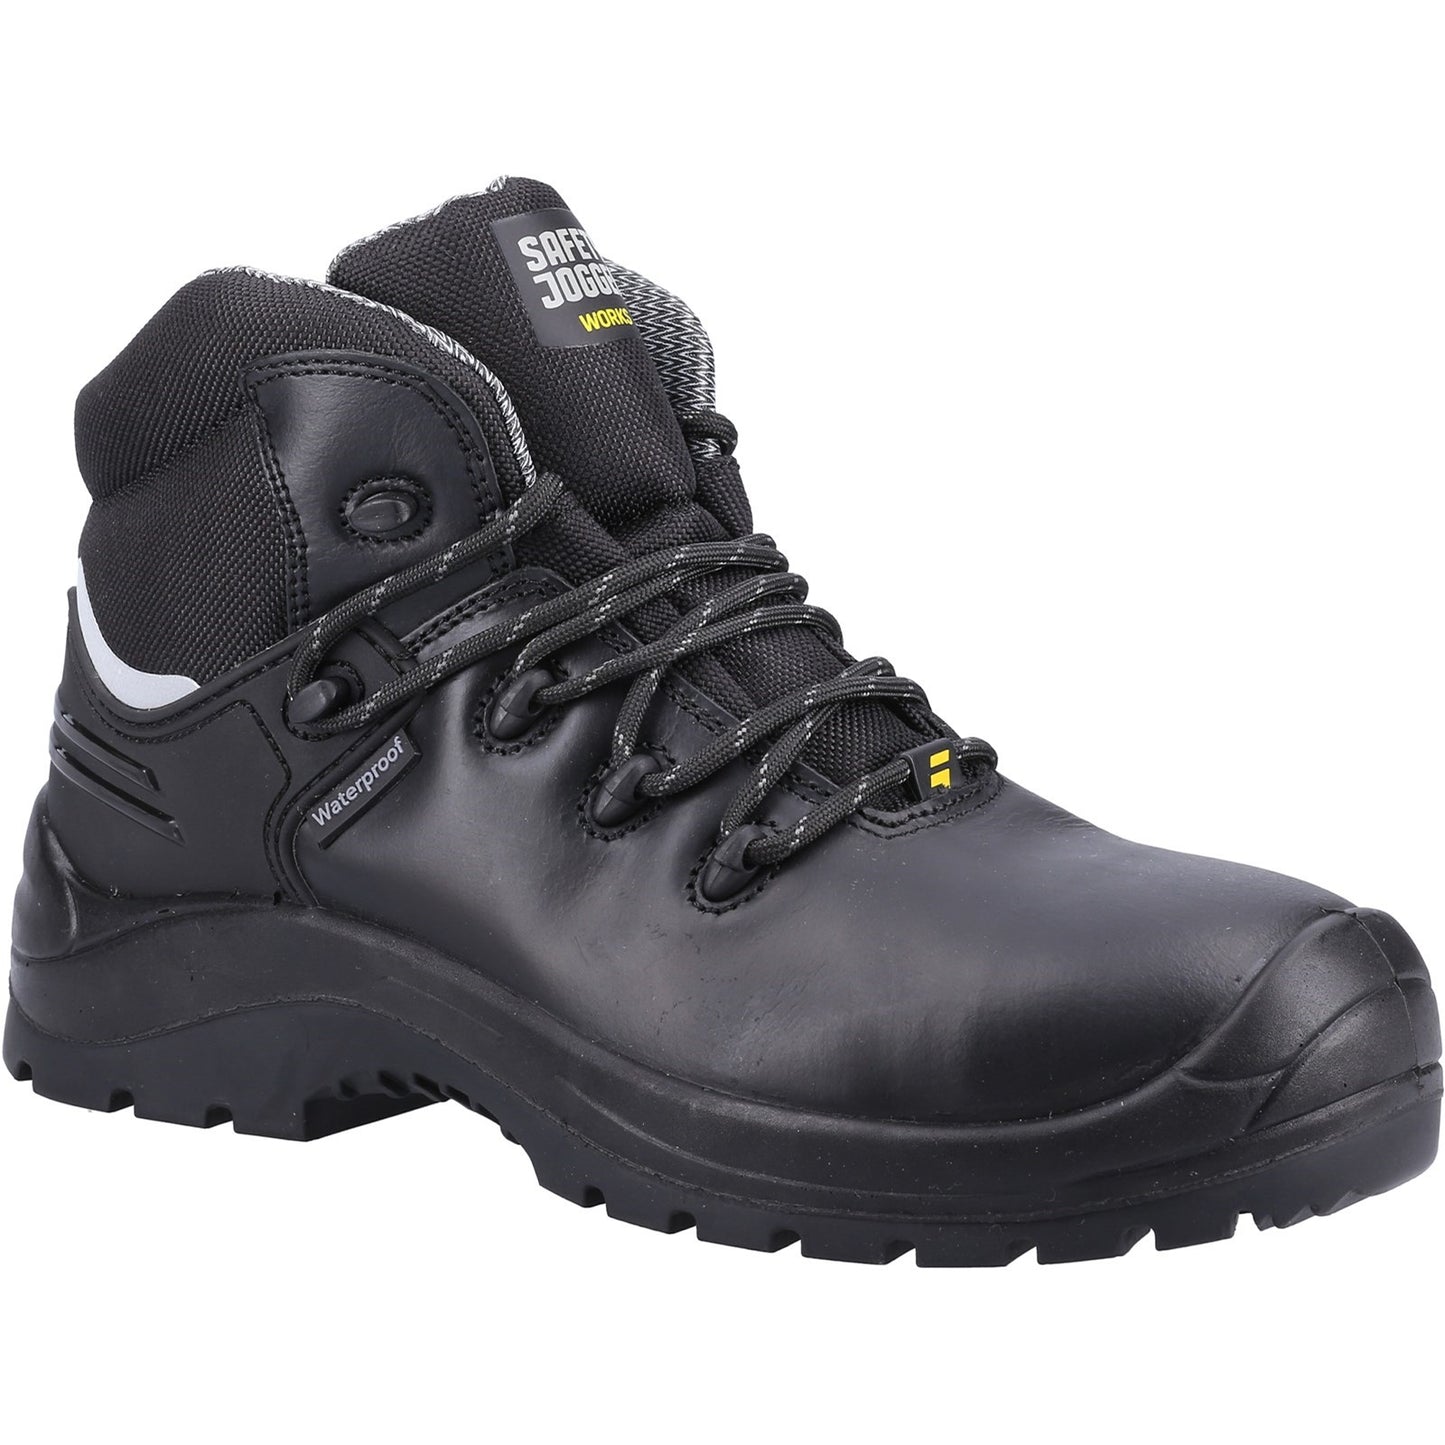 X430 S3 Waterproof Safety Footwear, Safety Jogger